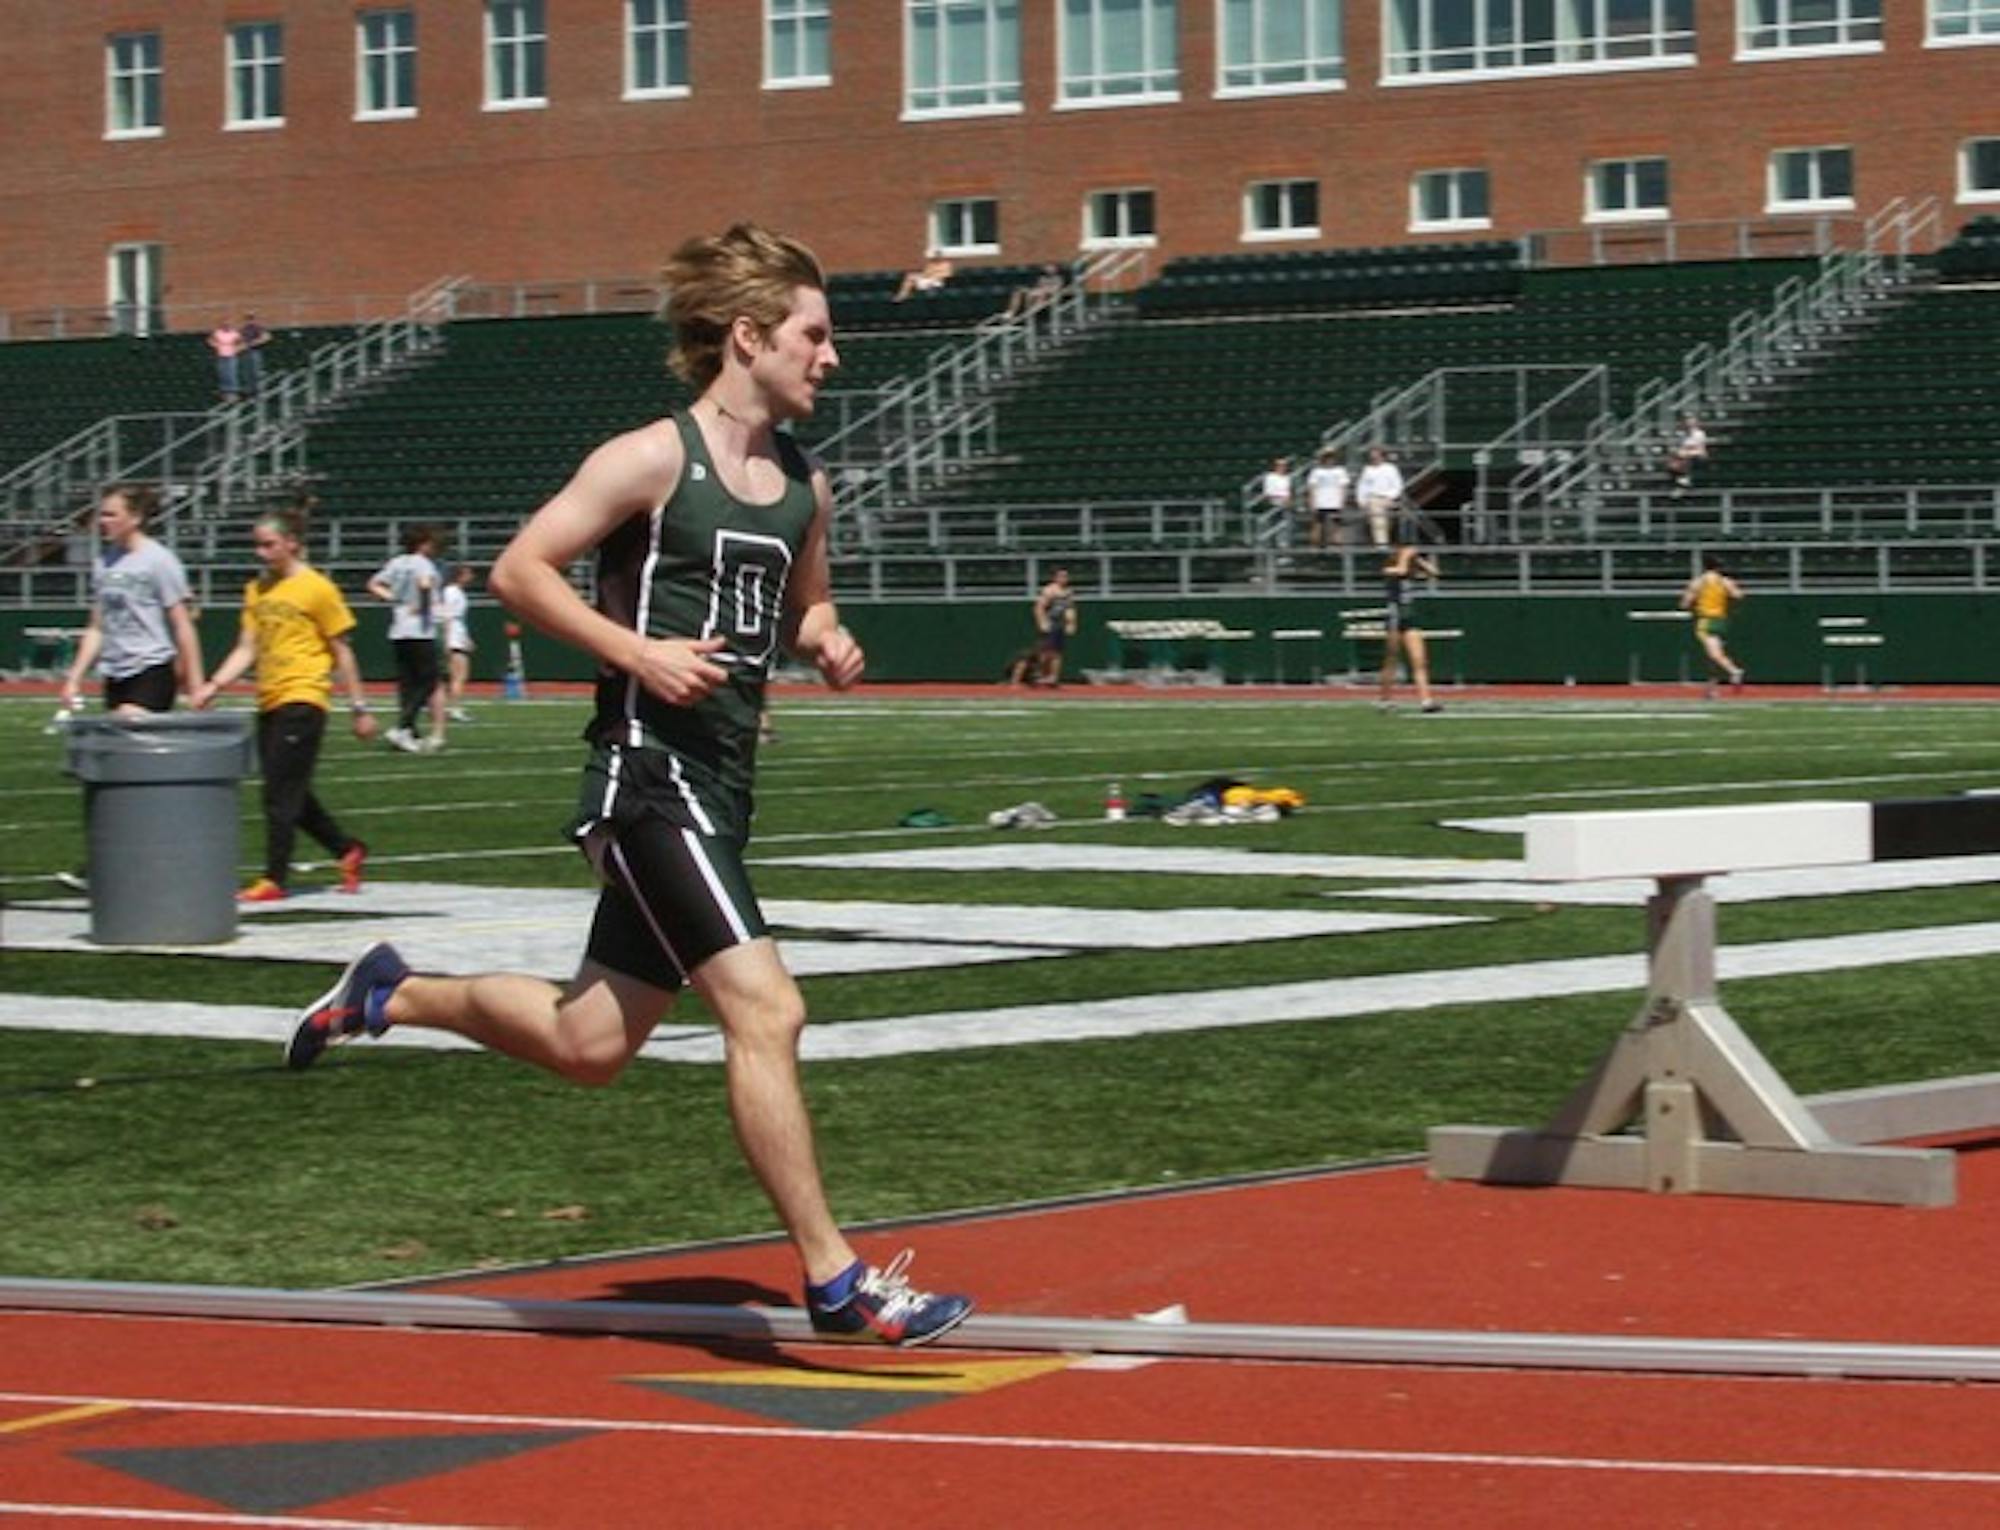 The Penn Relays served as a tune-up against stiff competition in preparation for the Ivy Heptagonals on May 10-11.